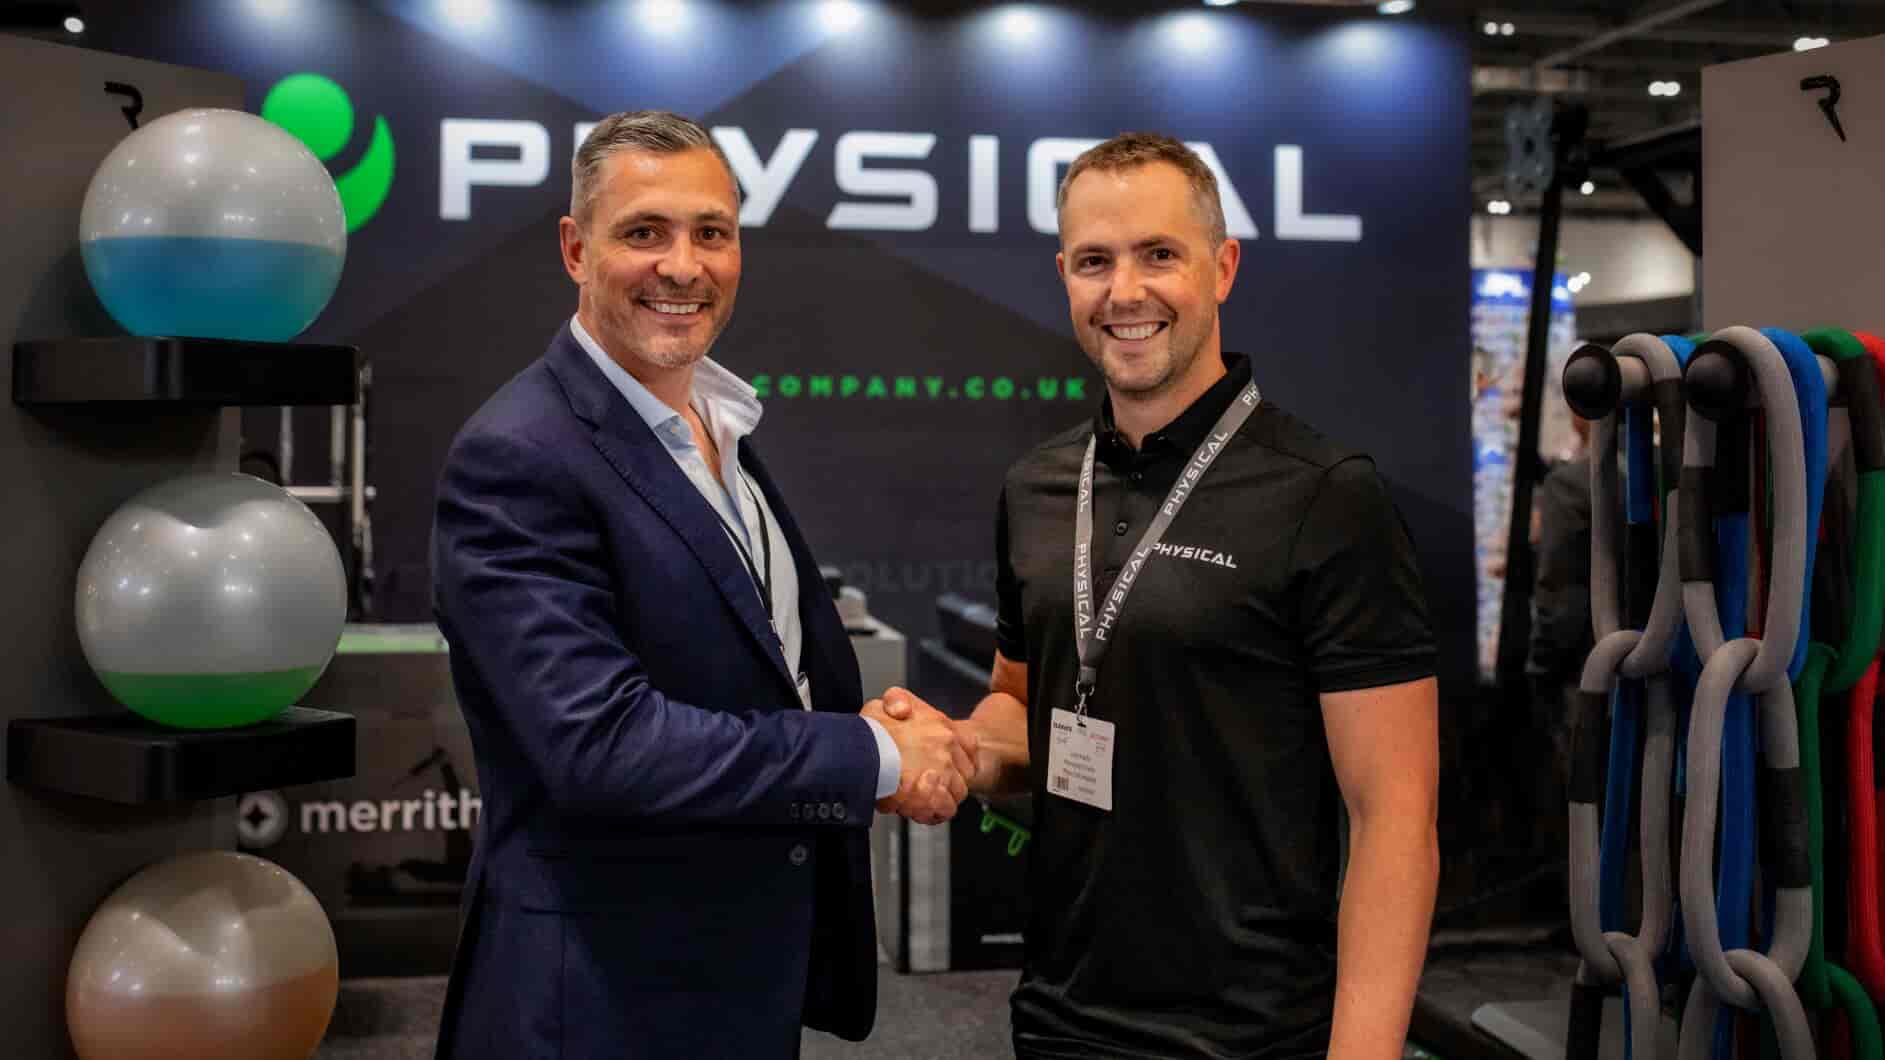 Physical Company named as exclusive UK distributor for neuromuscular fitness innovator Reaxing